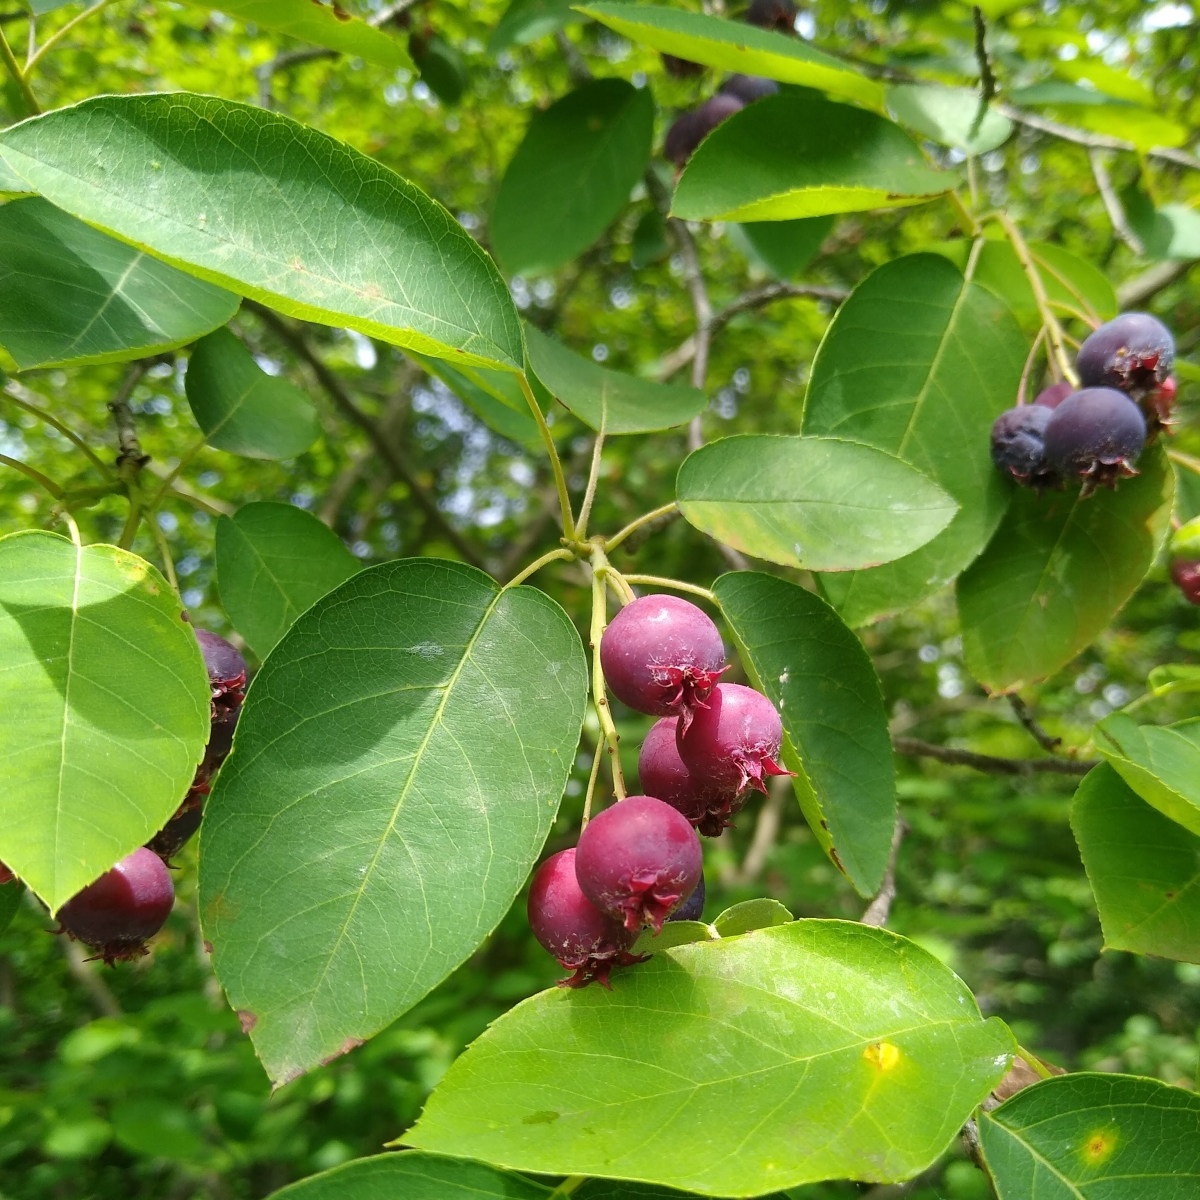 Red and purple berries on a tree branch